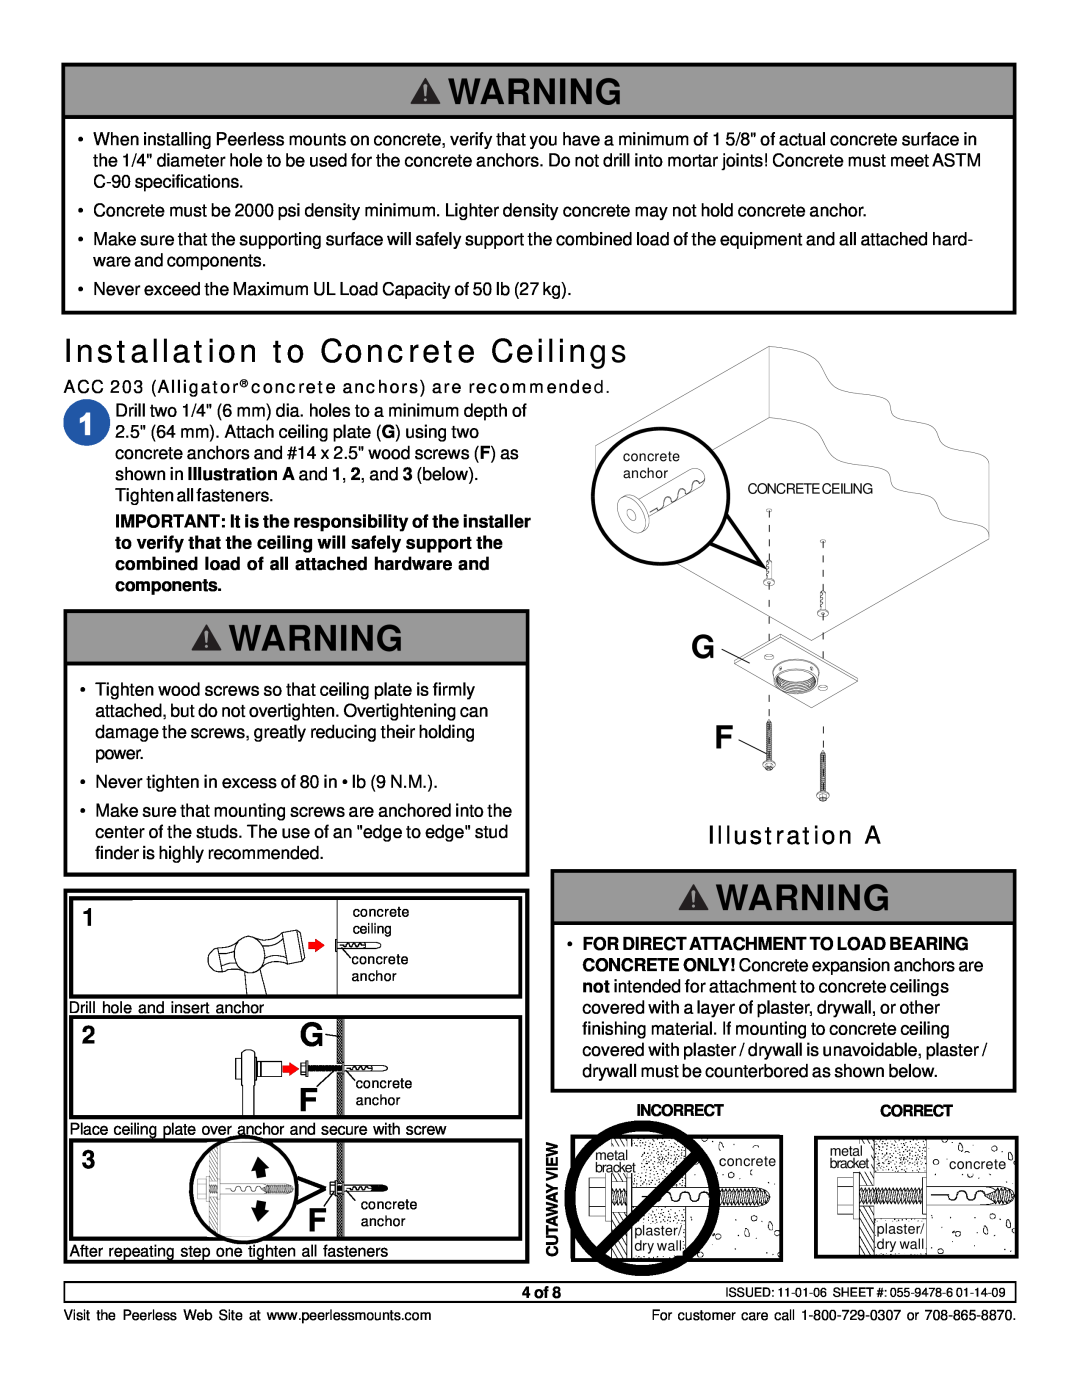 NEC NP40CM instruction sheet Installation to Concrete Ceilings, Illustration A 